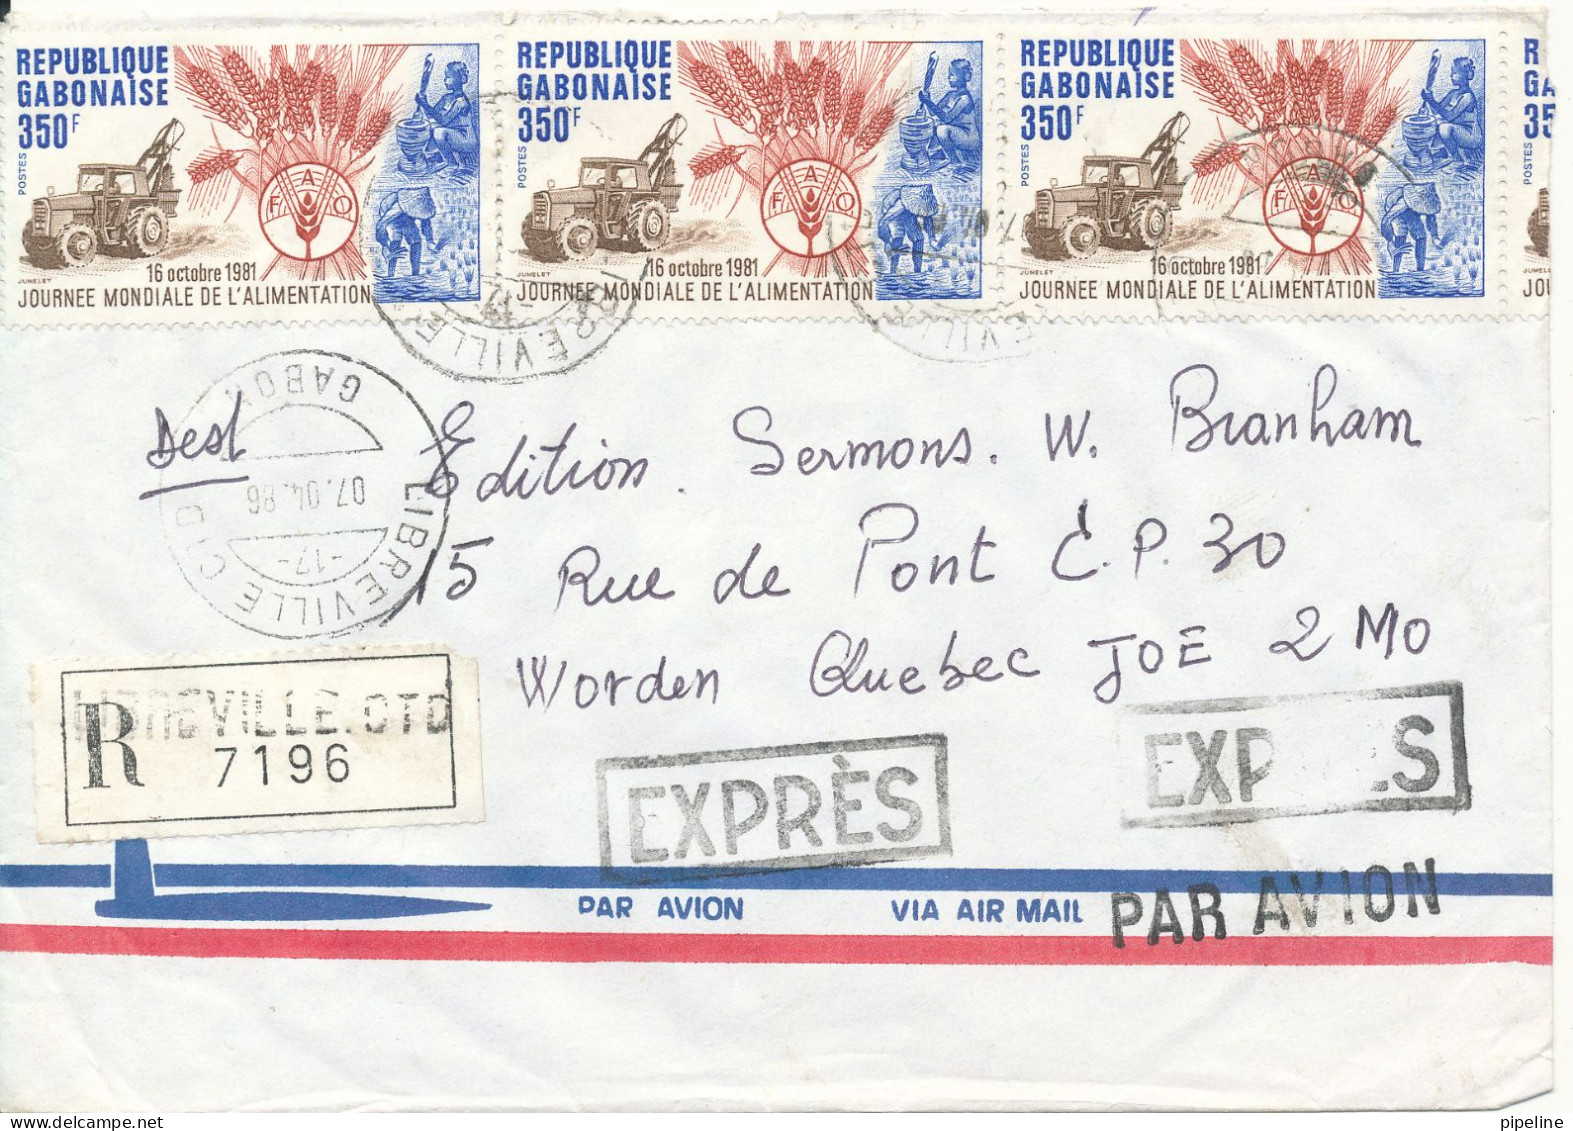 Gabon Registered Air Mail Cover Sent Express To Canada 7-4-1986 FAO Stamps On Front And Backside Of The Cover - Gabon